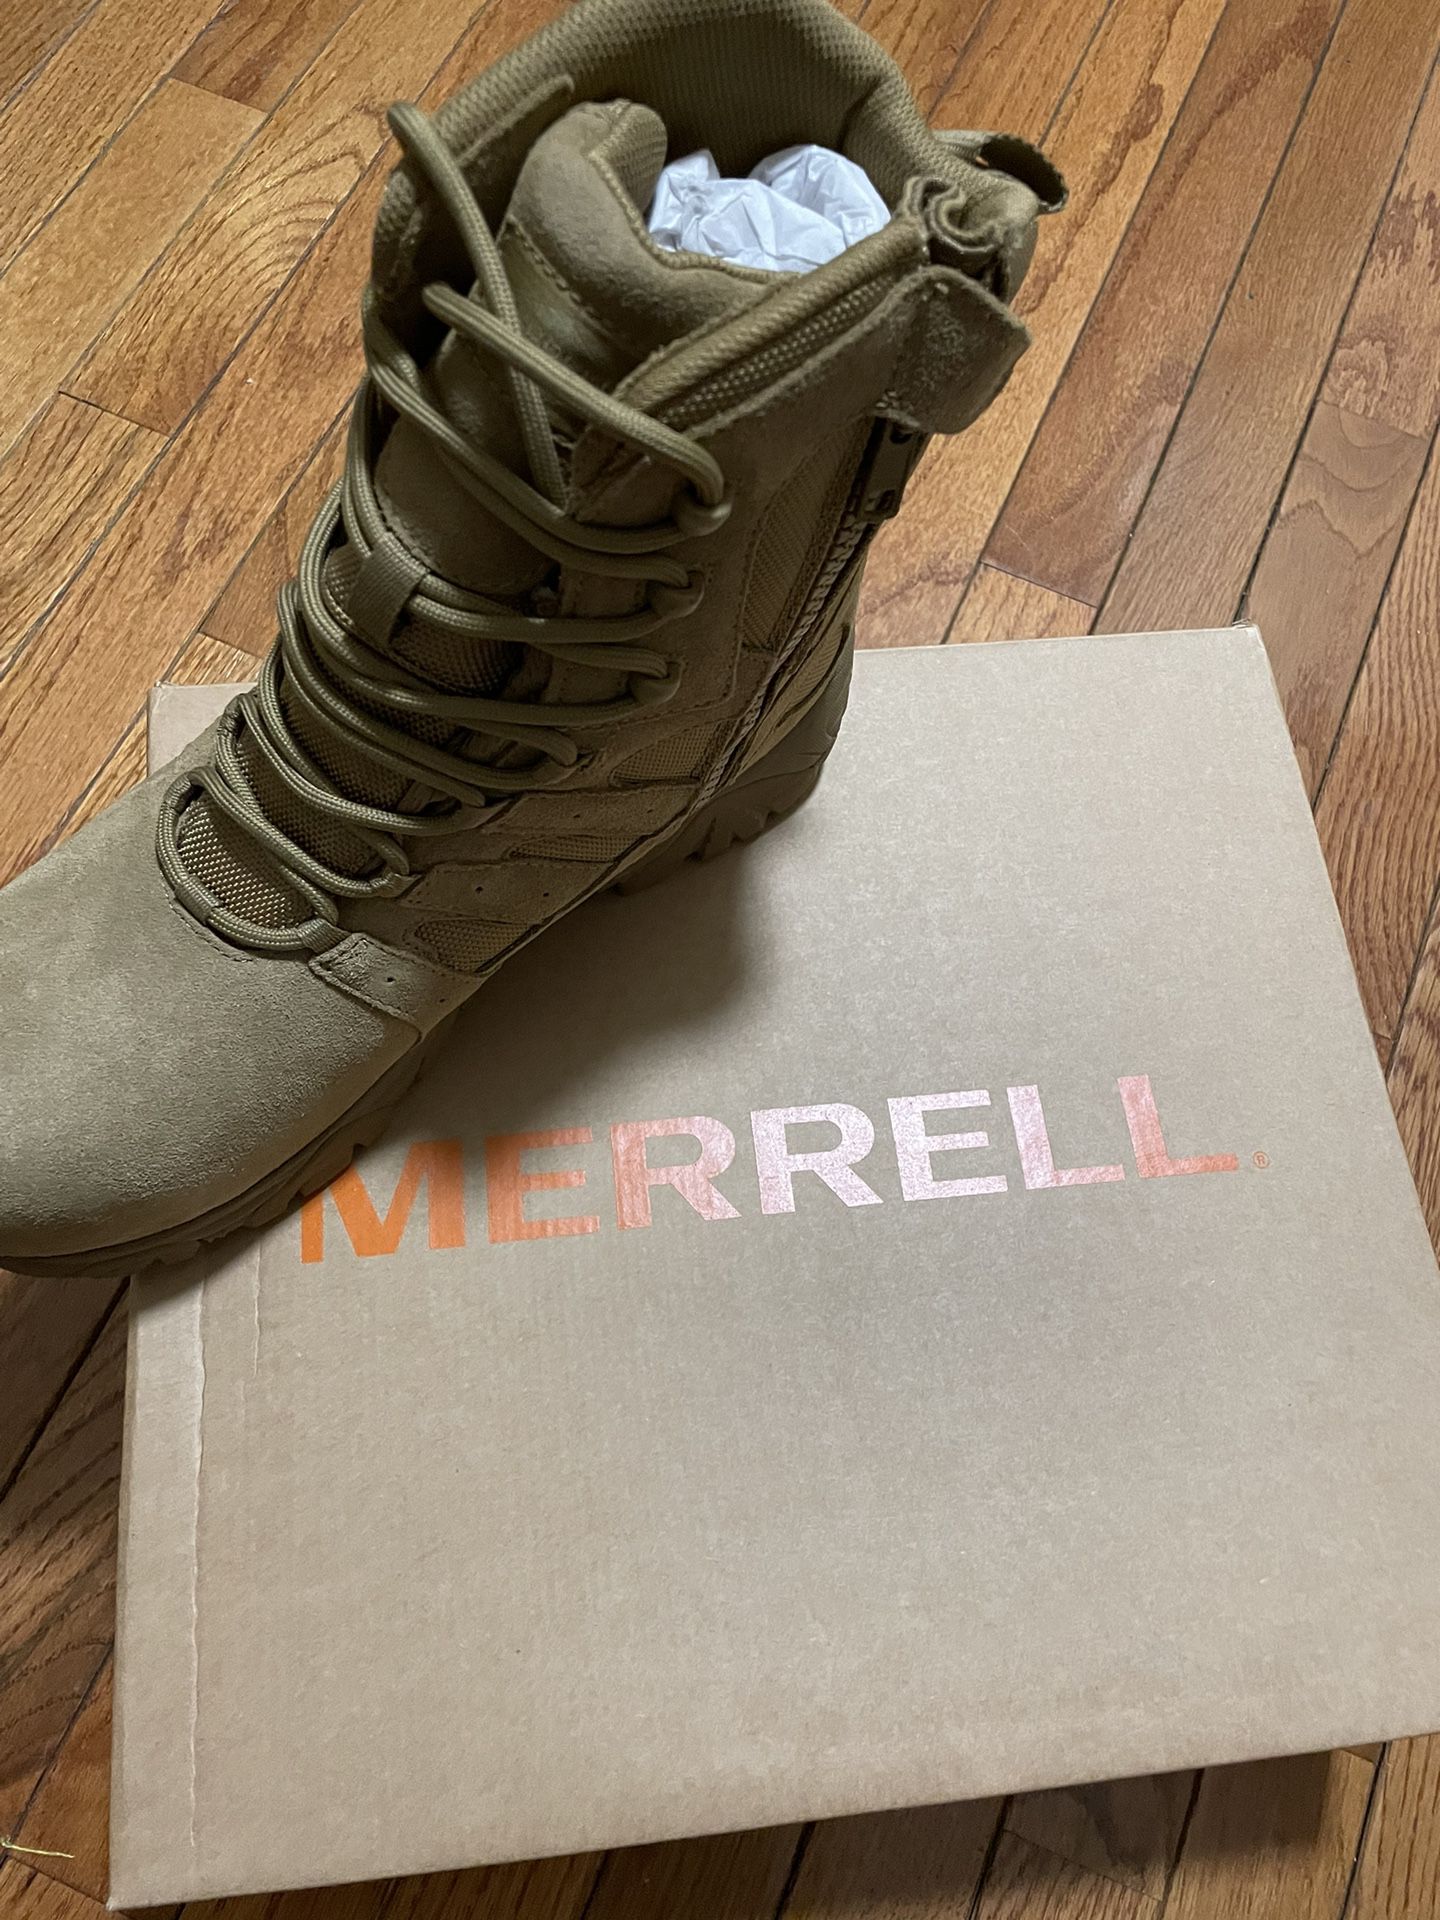 Merrell Composite Toe Working Boots (brown, Coyote) 9.5